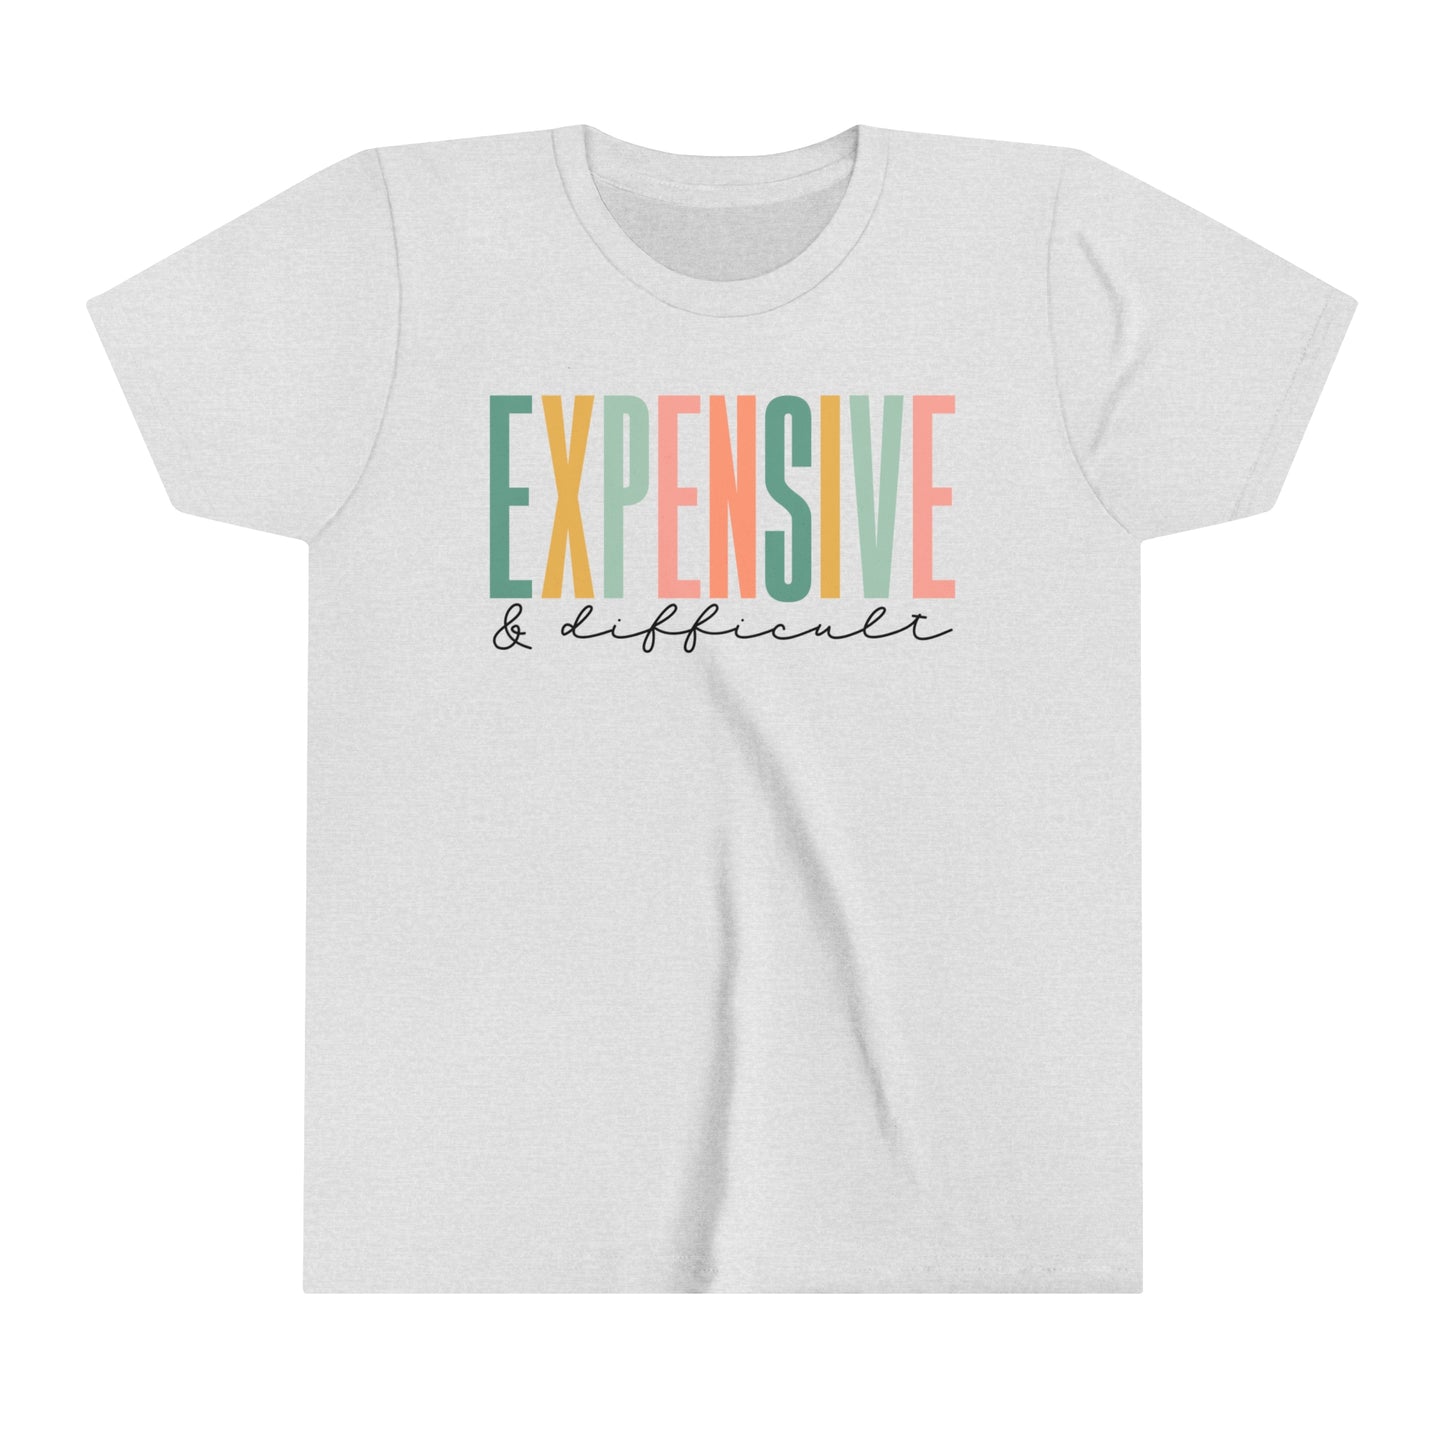 Expensive & Difficult Girl's Youth Funny Short Sleeve Shirt